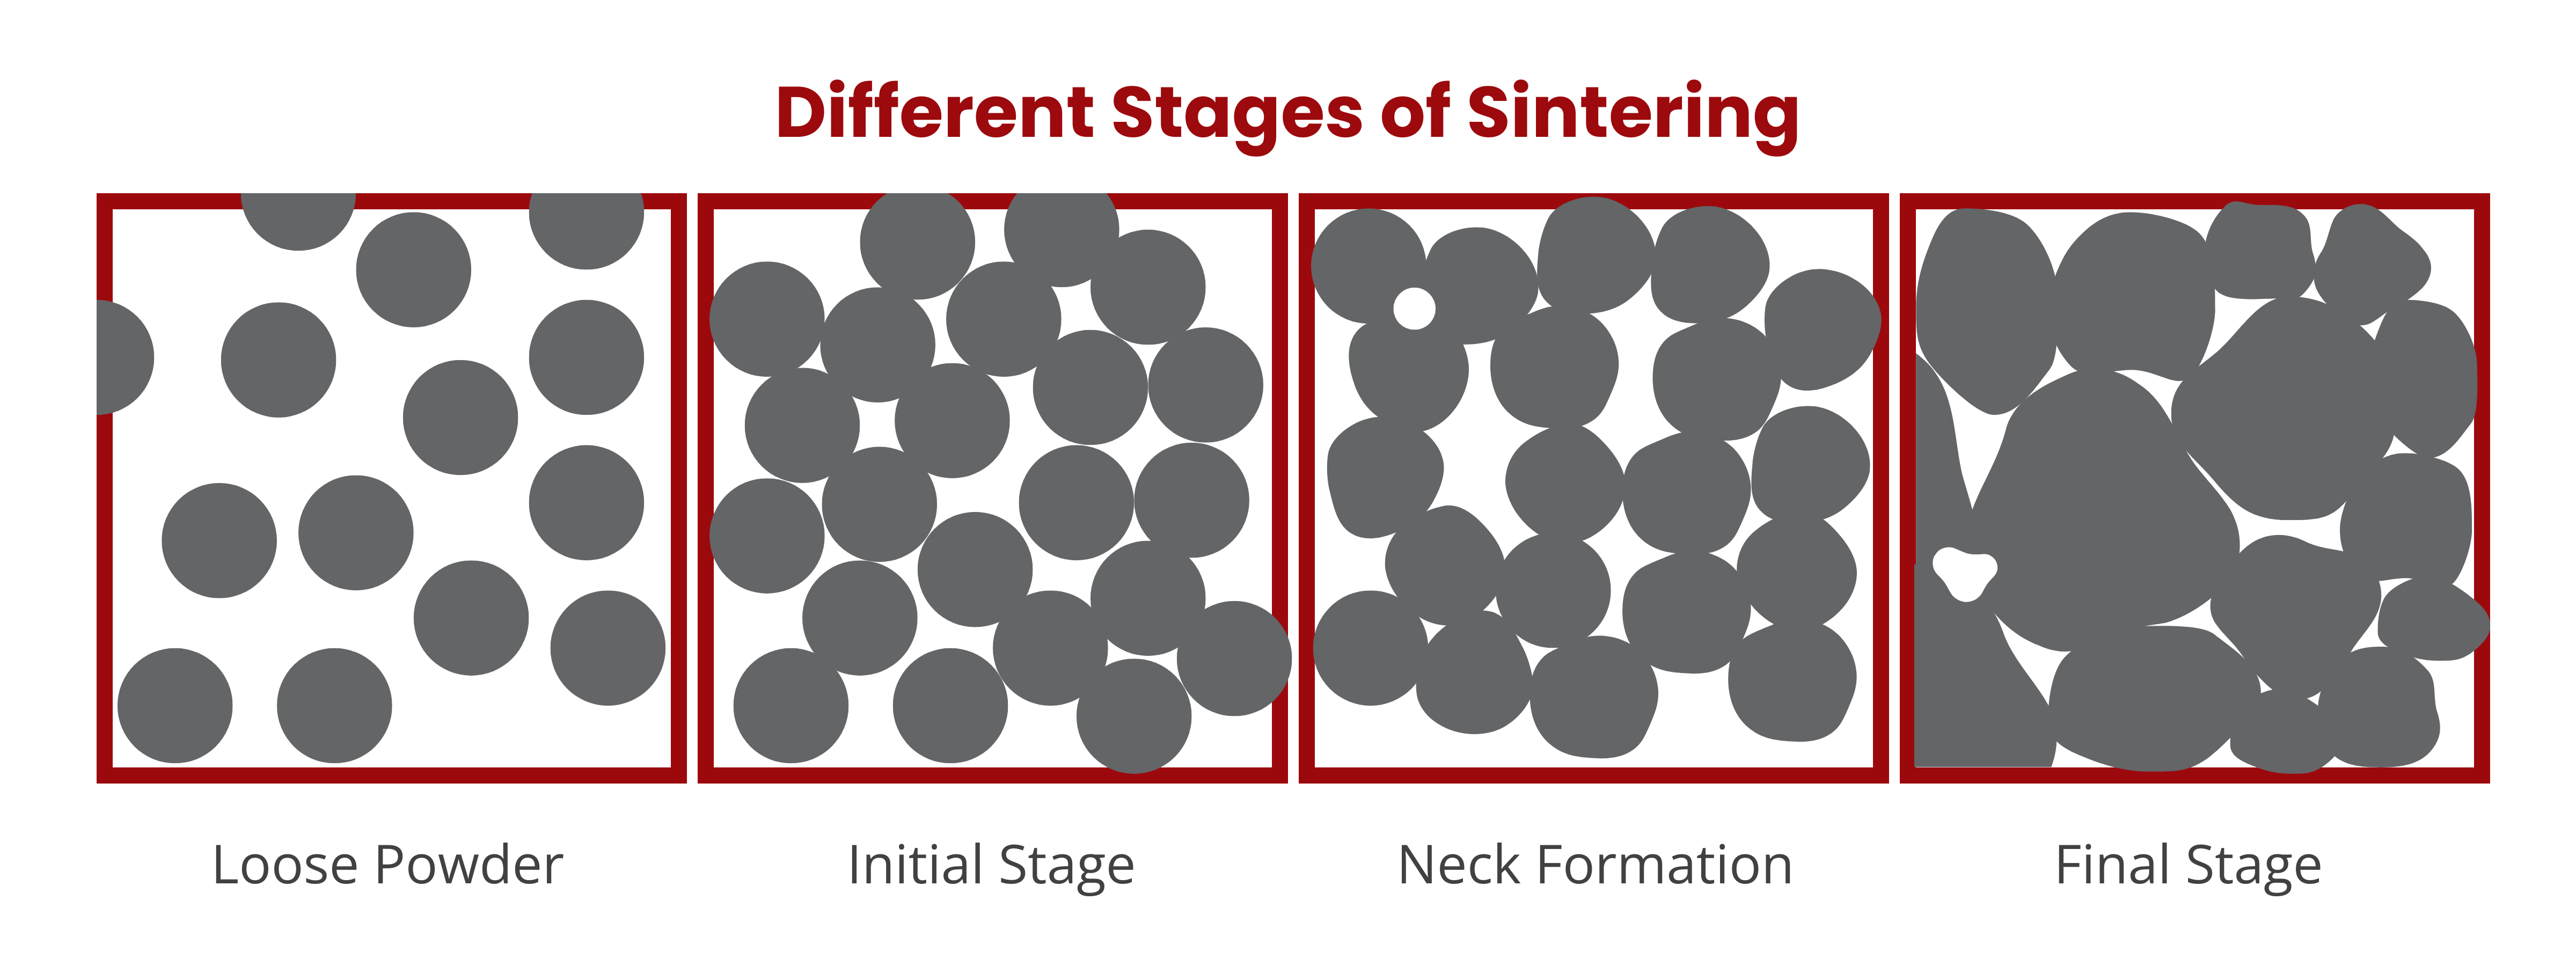 Different Stages of Sintering